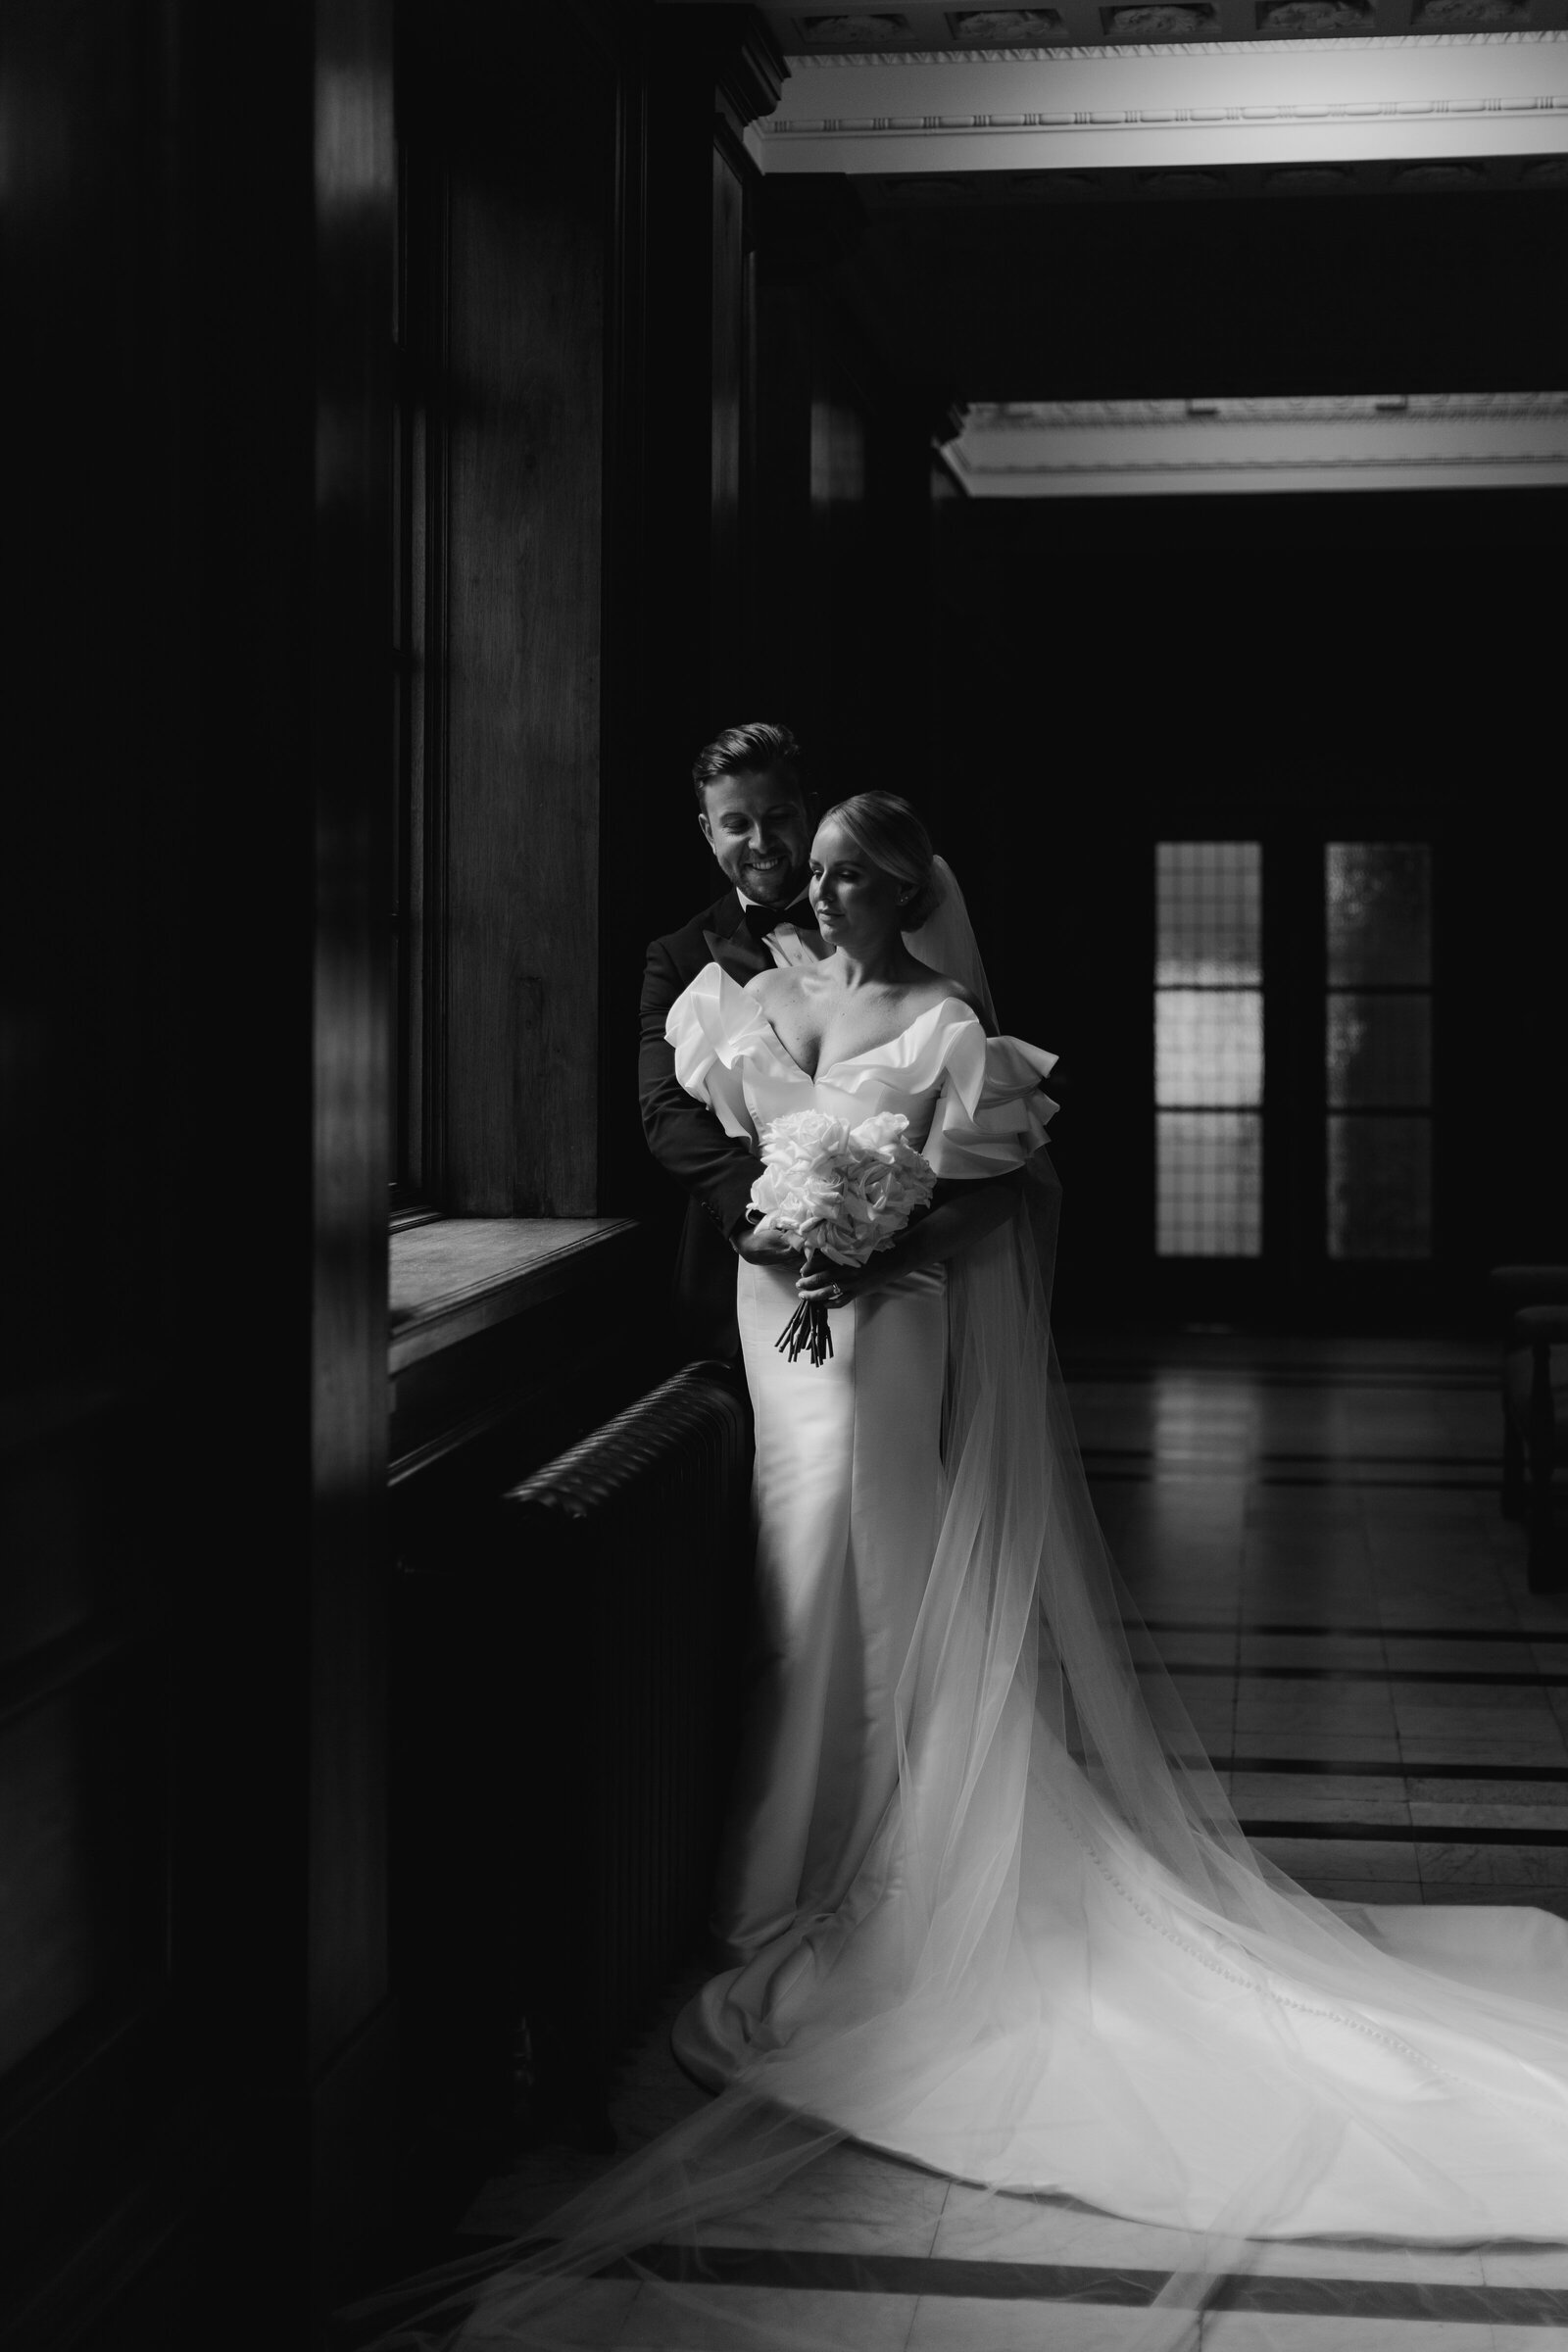 100 editorial wedding photography at the old marylebone town hall